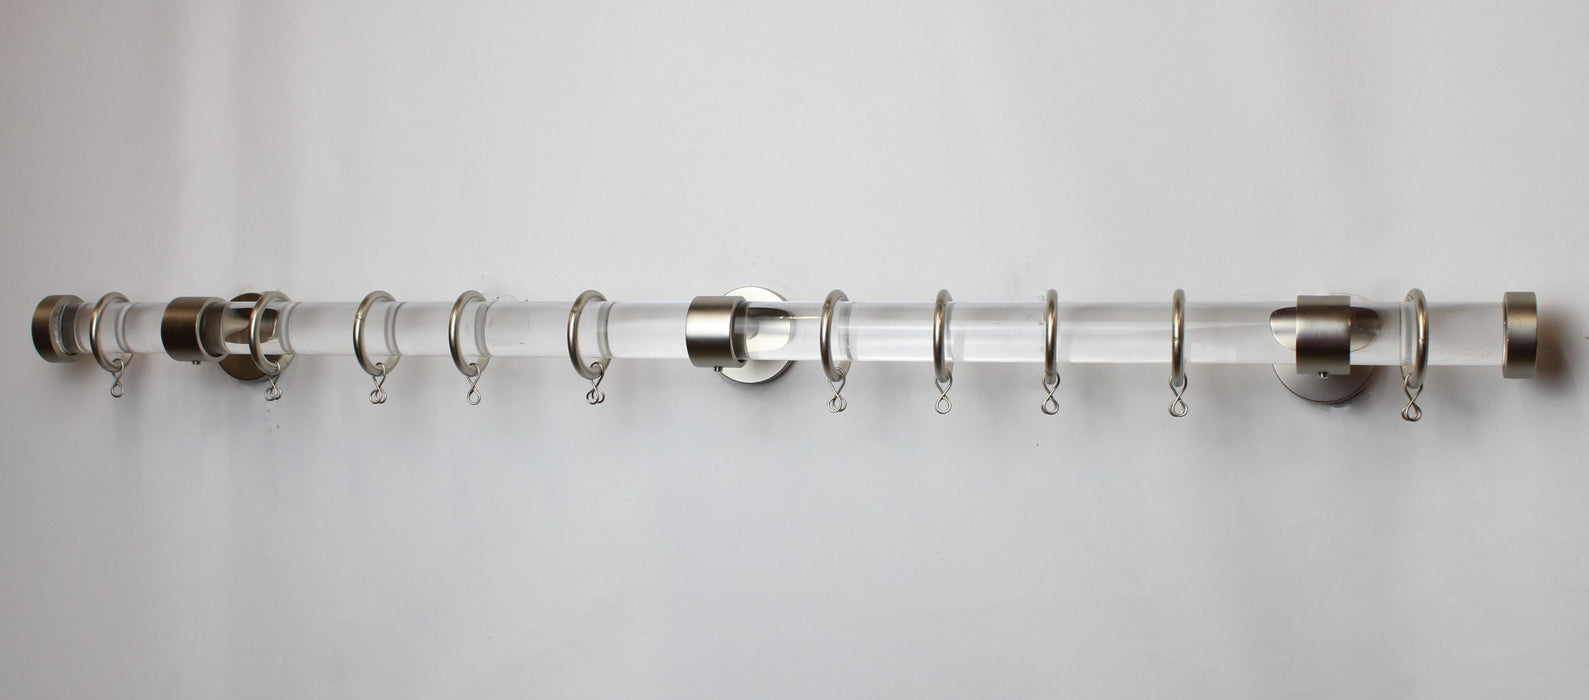 1 Inch Acrylic Lucite Round Drapery Rod Set-Includes Curtain Rod, Short Enclosed/Ceiling Mount Brackets, Rings, End Caps -Free Shipping